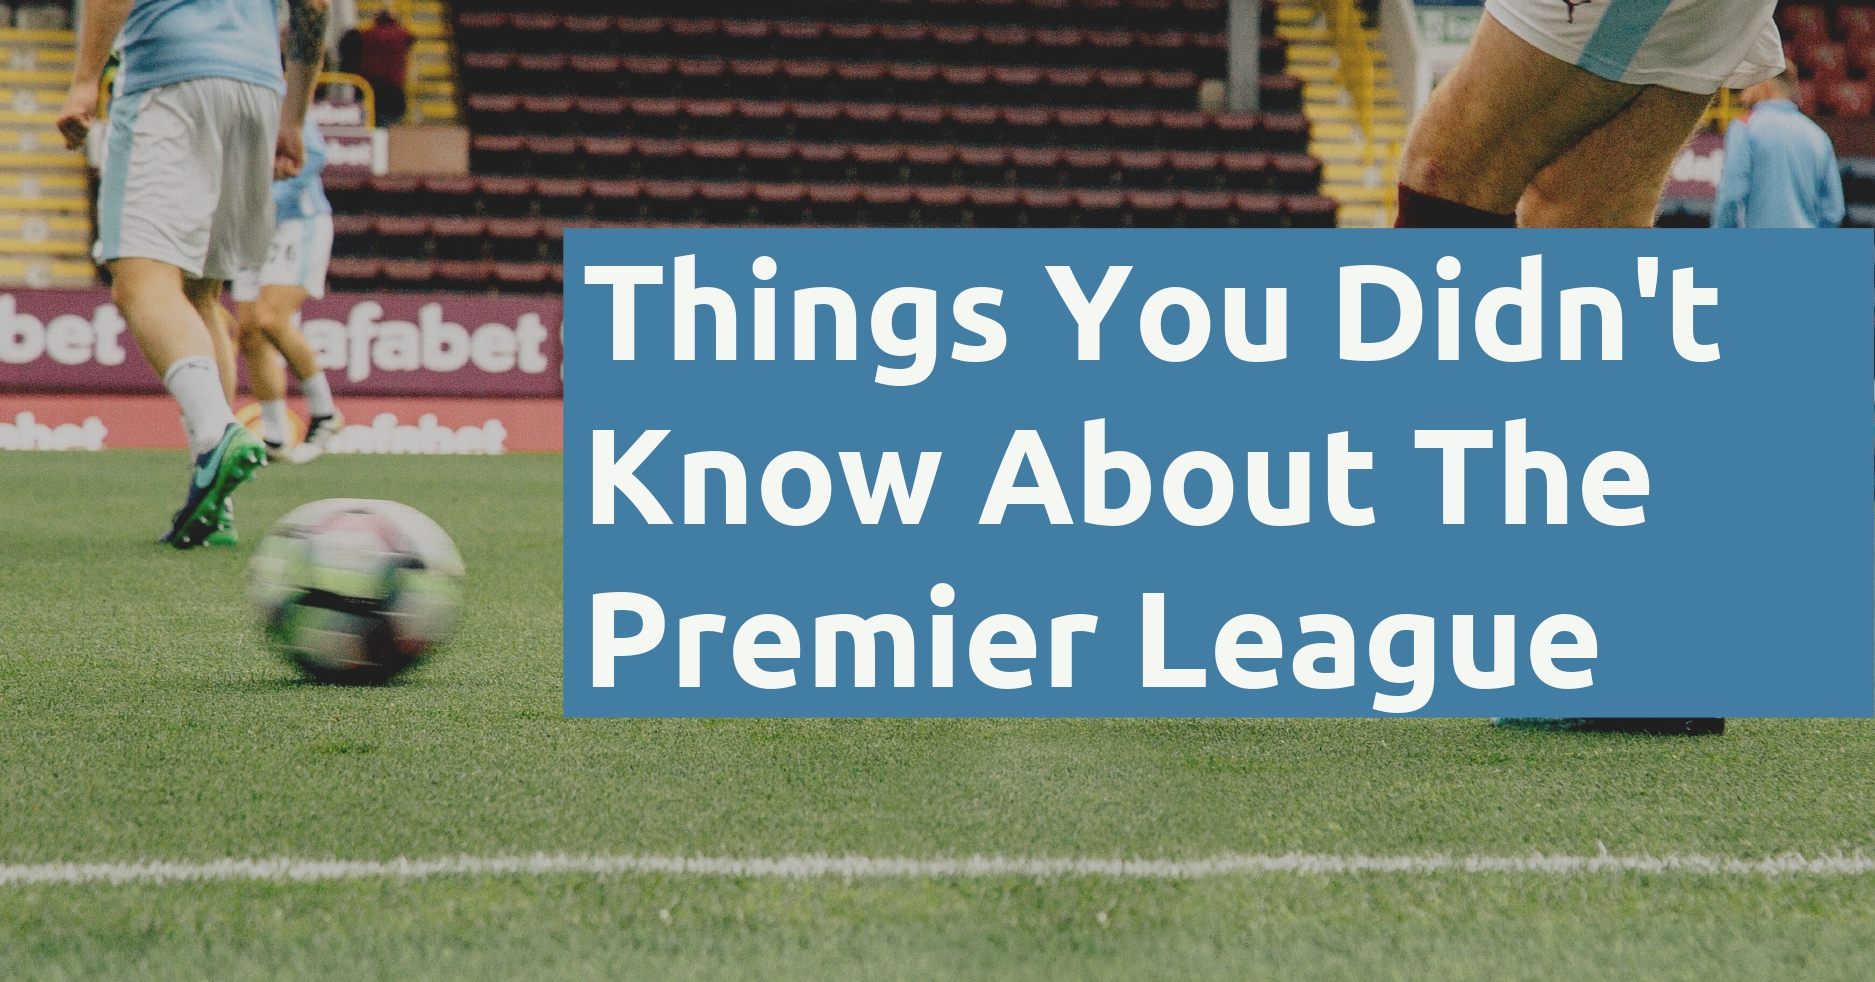 23 Things You Didn't Know About the Premier League (2022) - Football Handbook